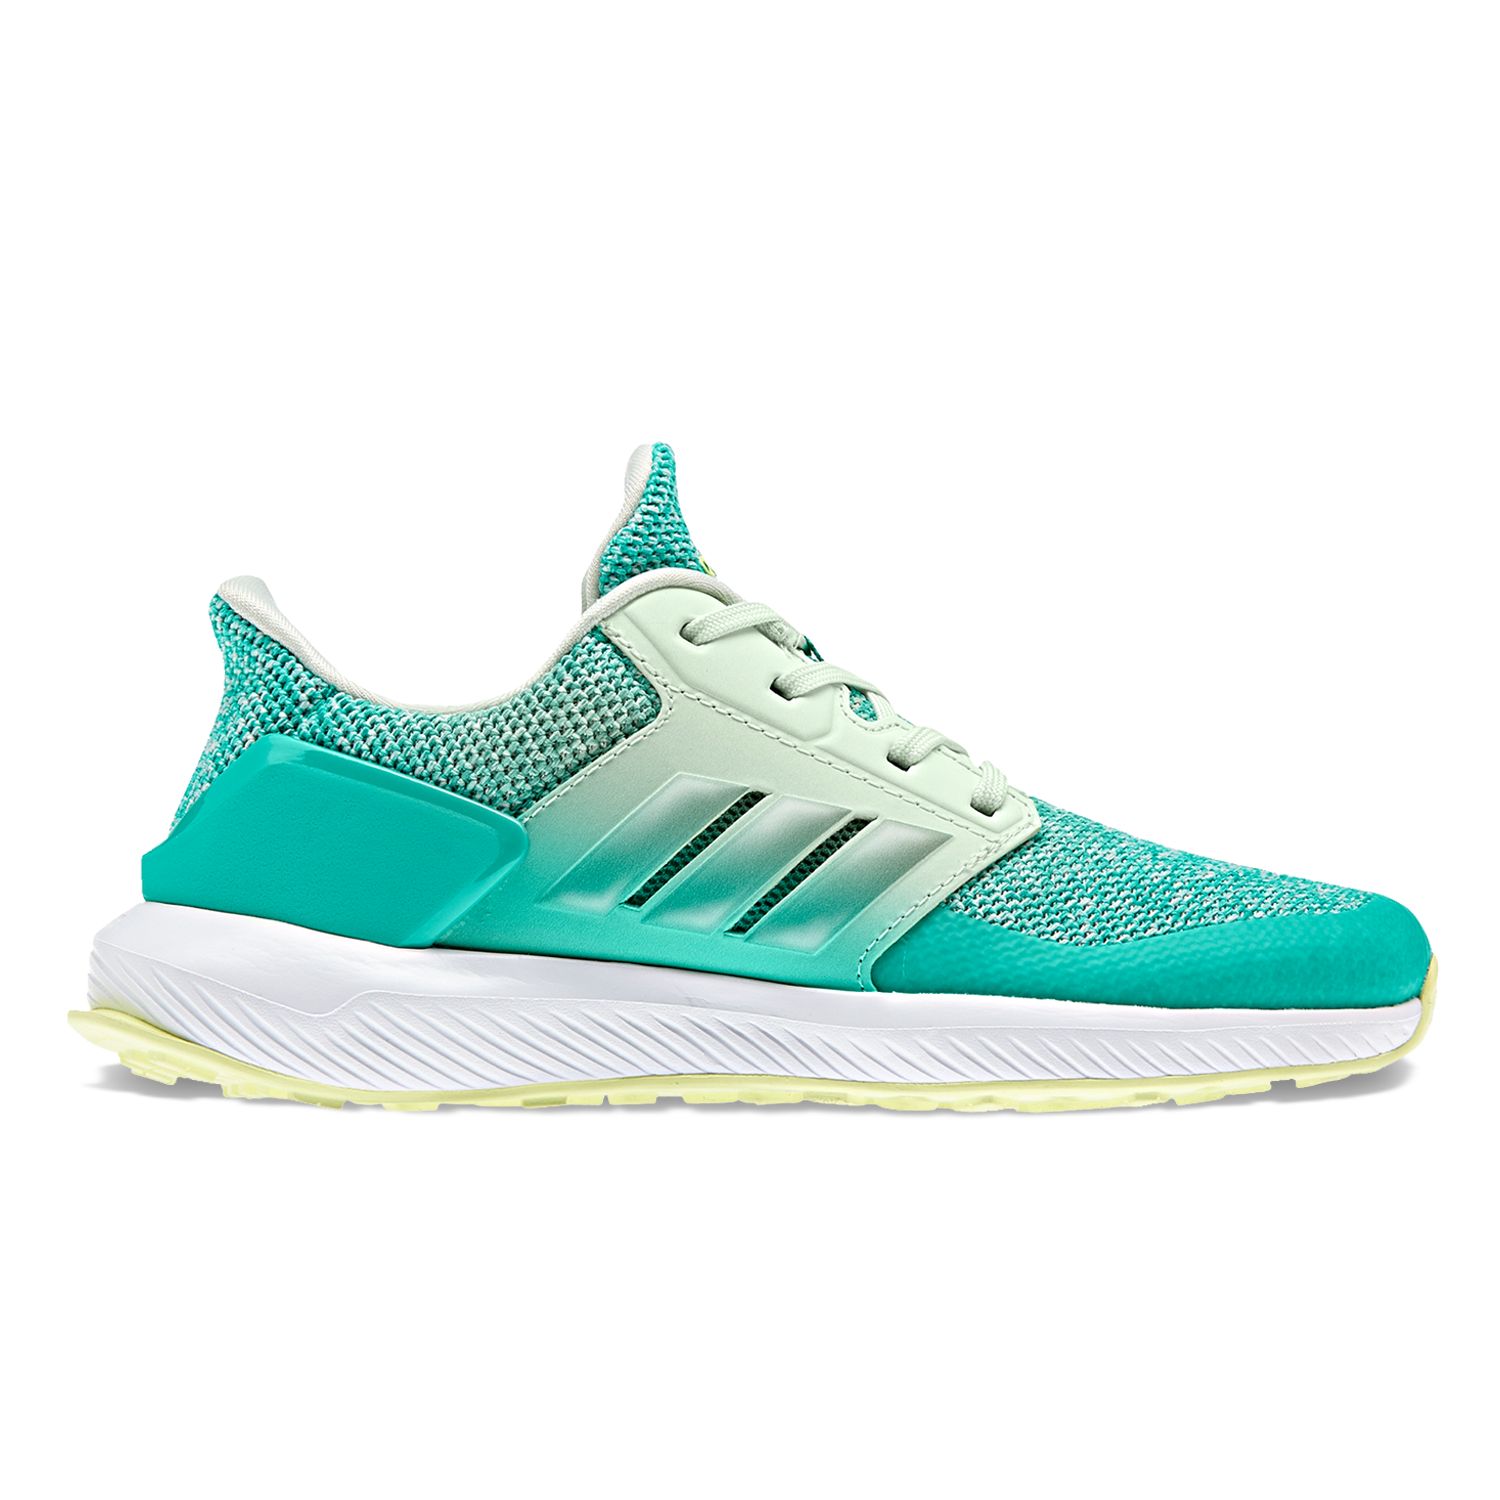 adidas childrens running shoes